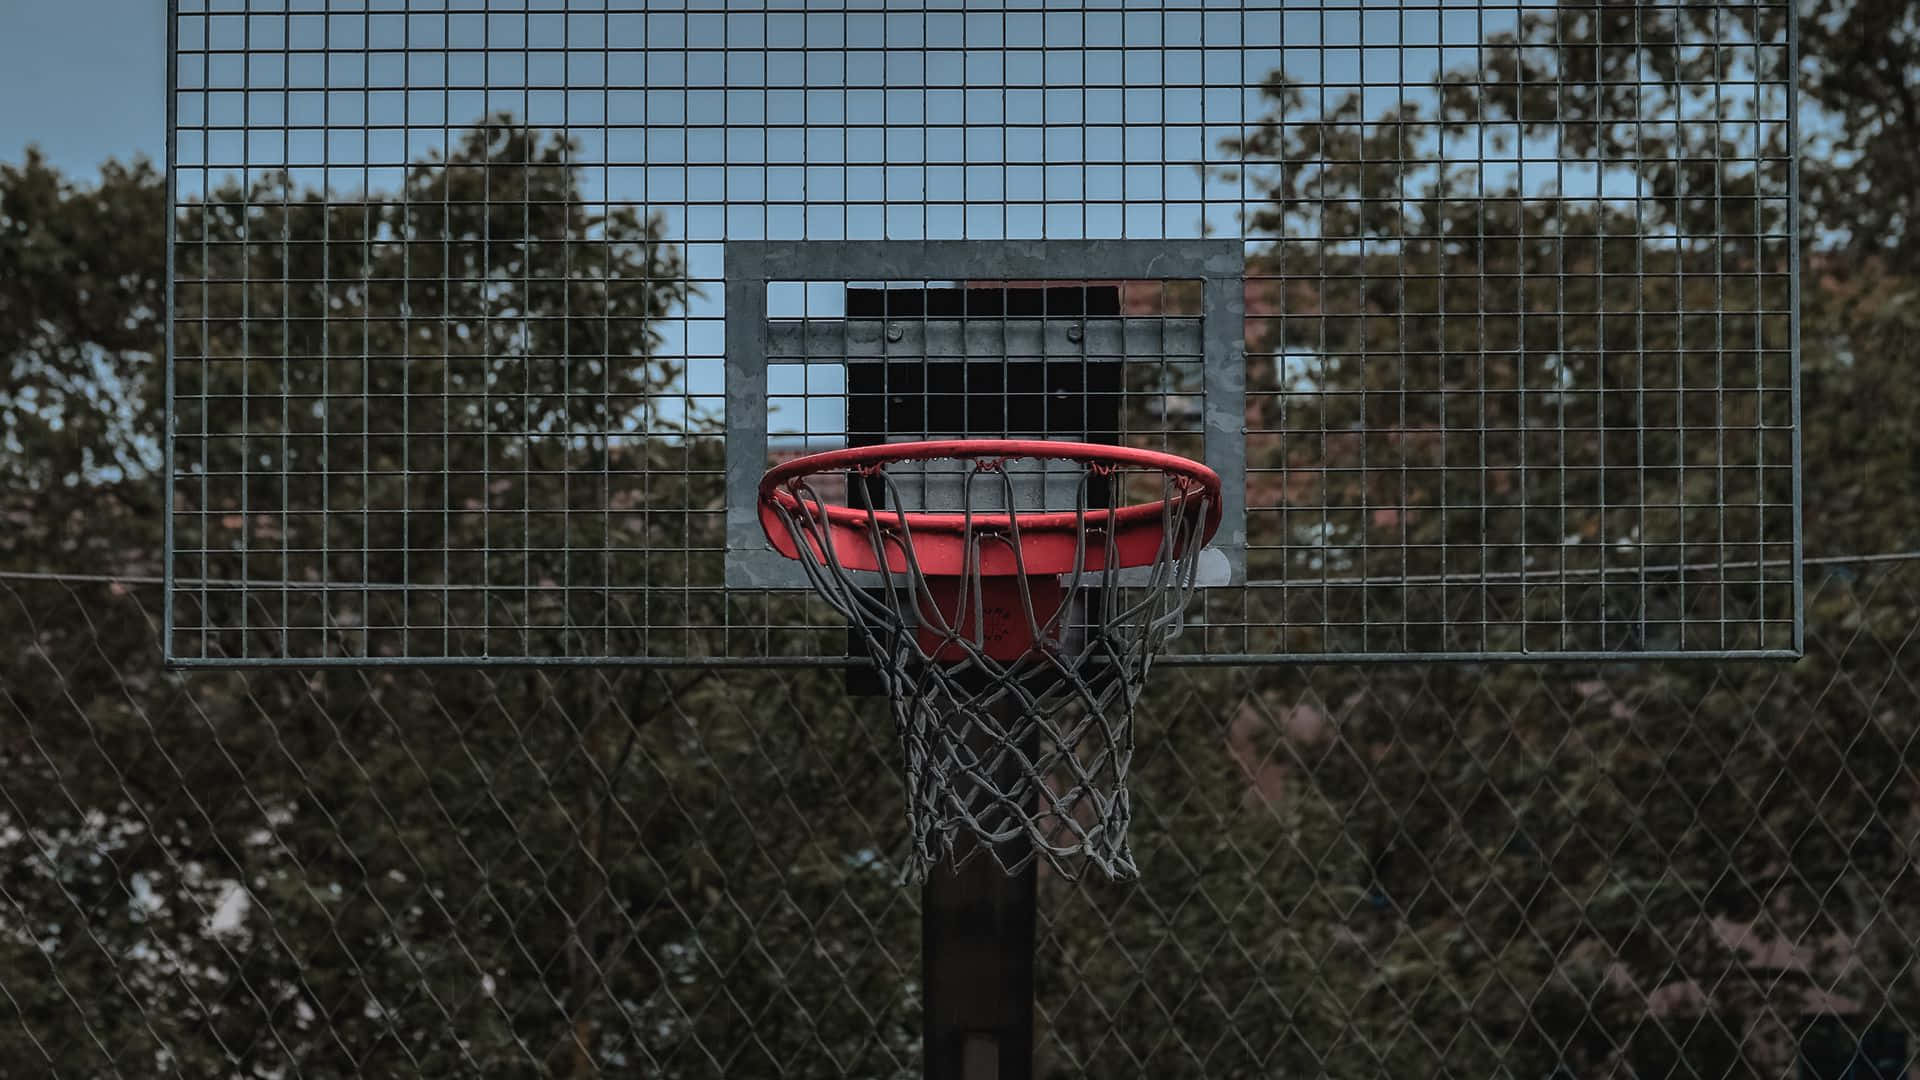 An Action Packed Game of Basketball